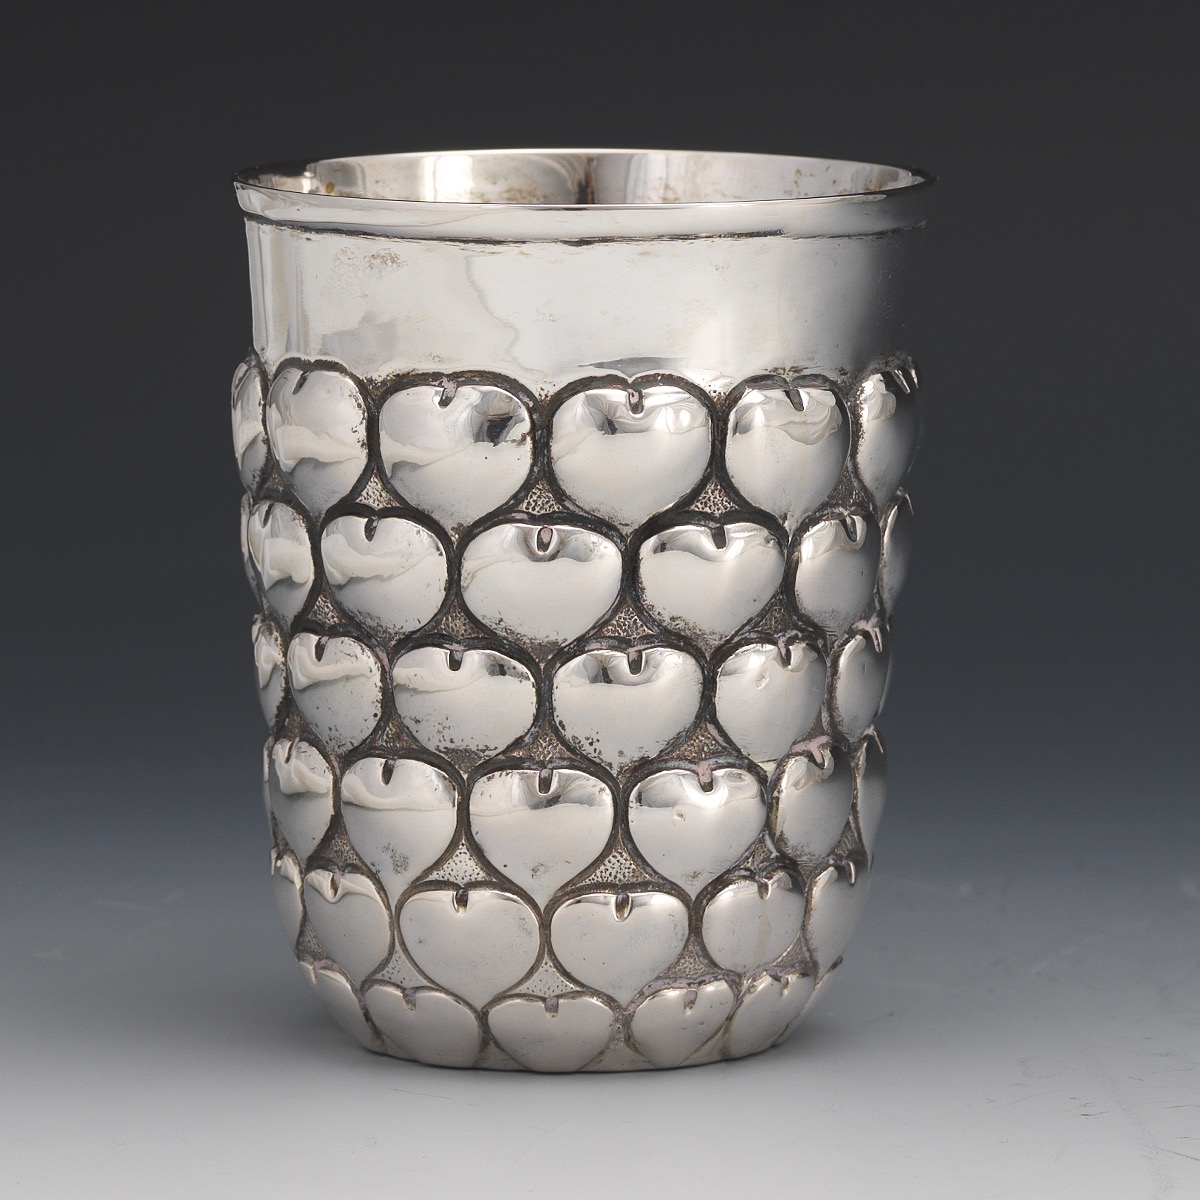 German Silver Cup in Style of Medieval 14th Century, by Ludwig Nereshelmer, Hanau - Image 5 of 7